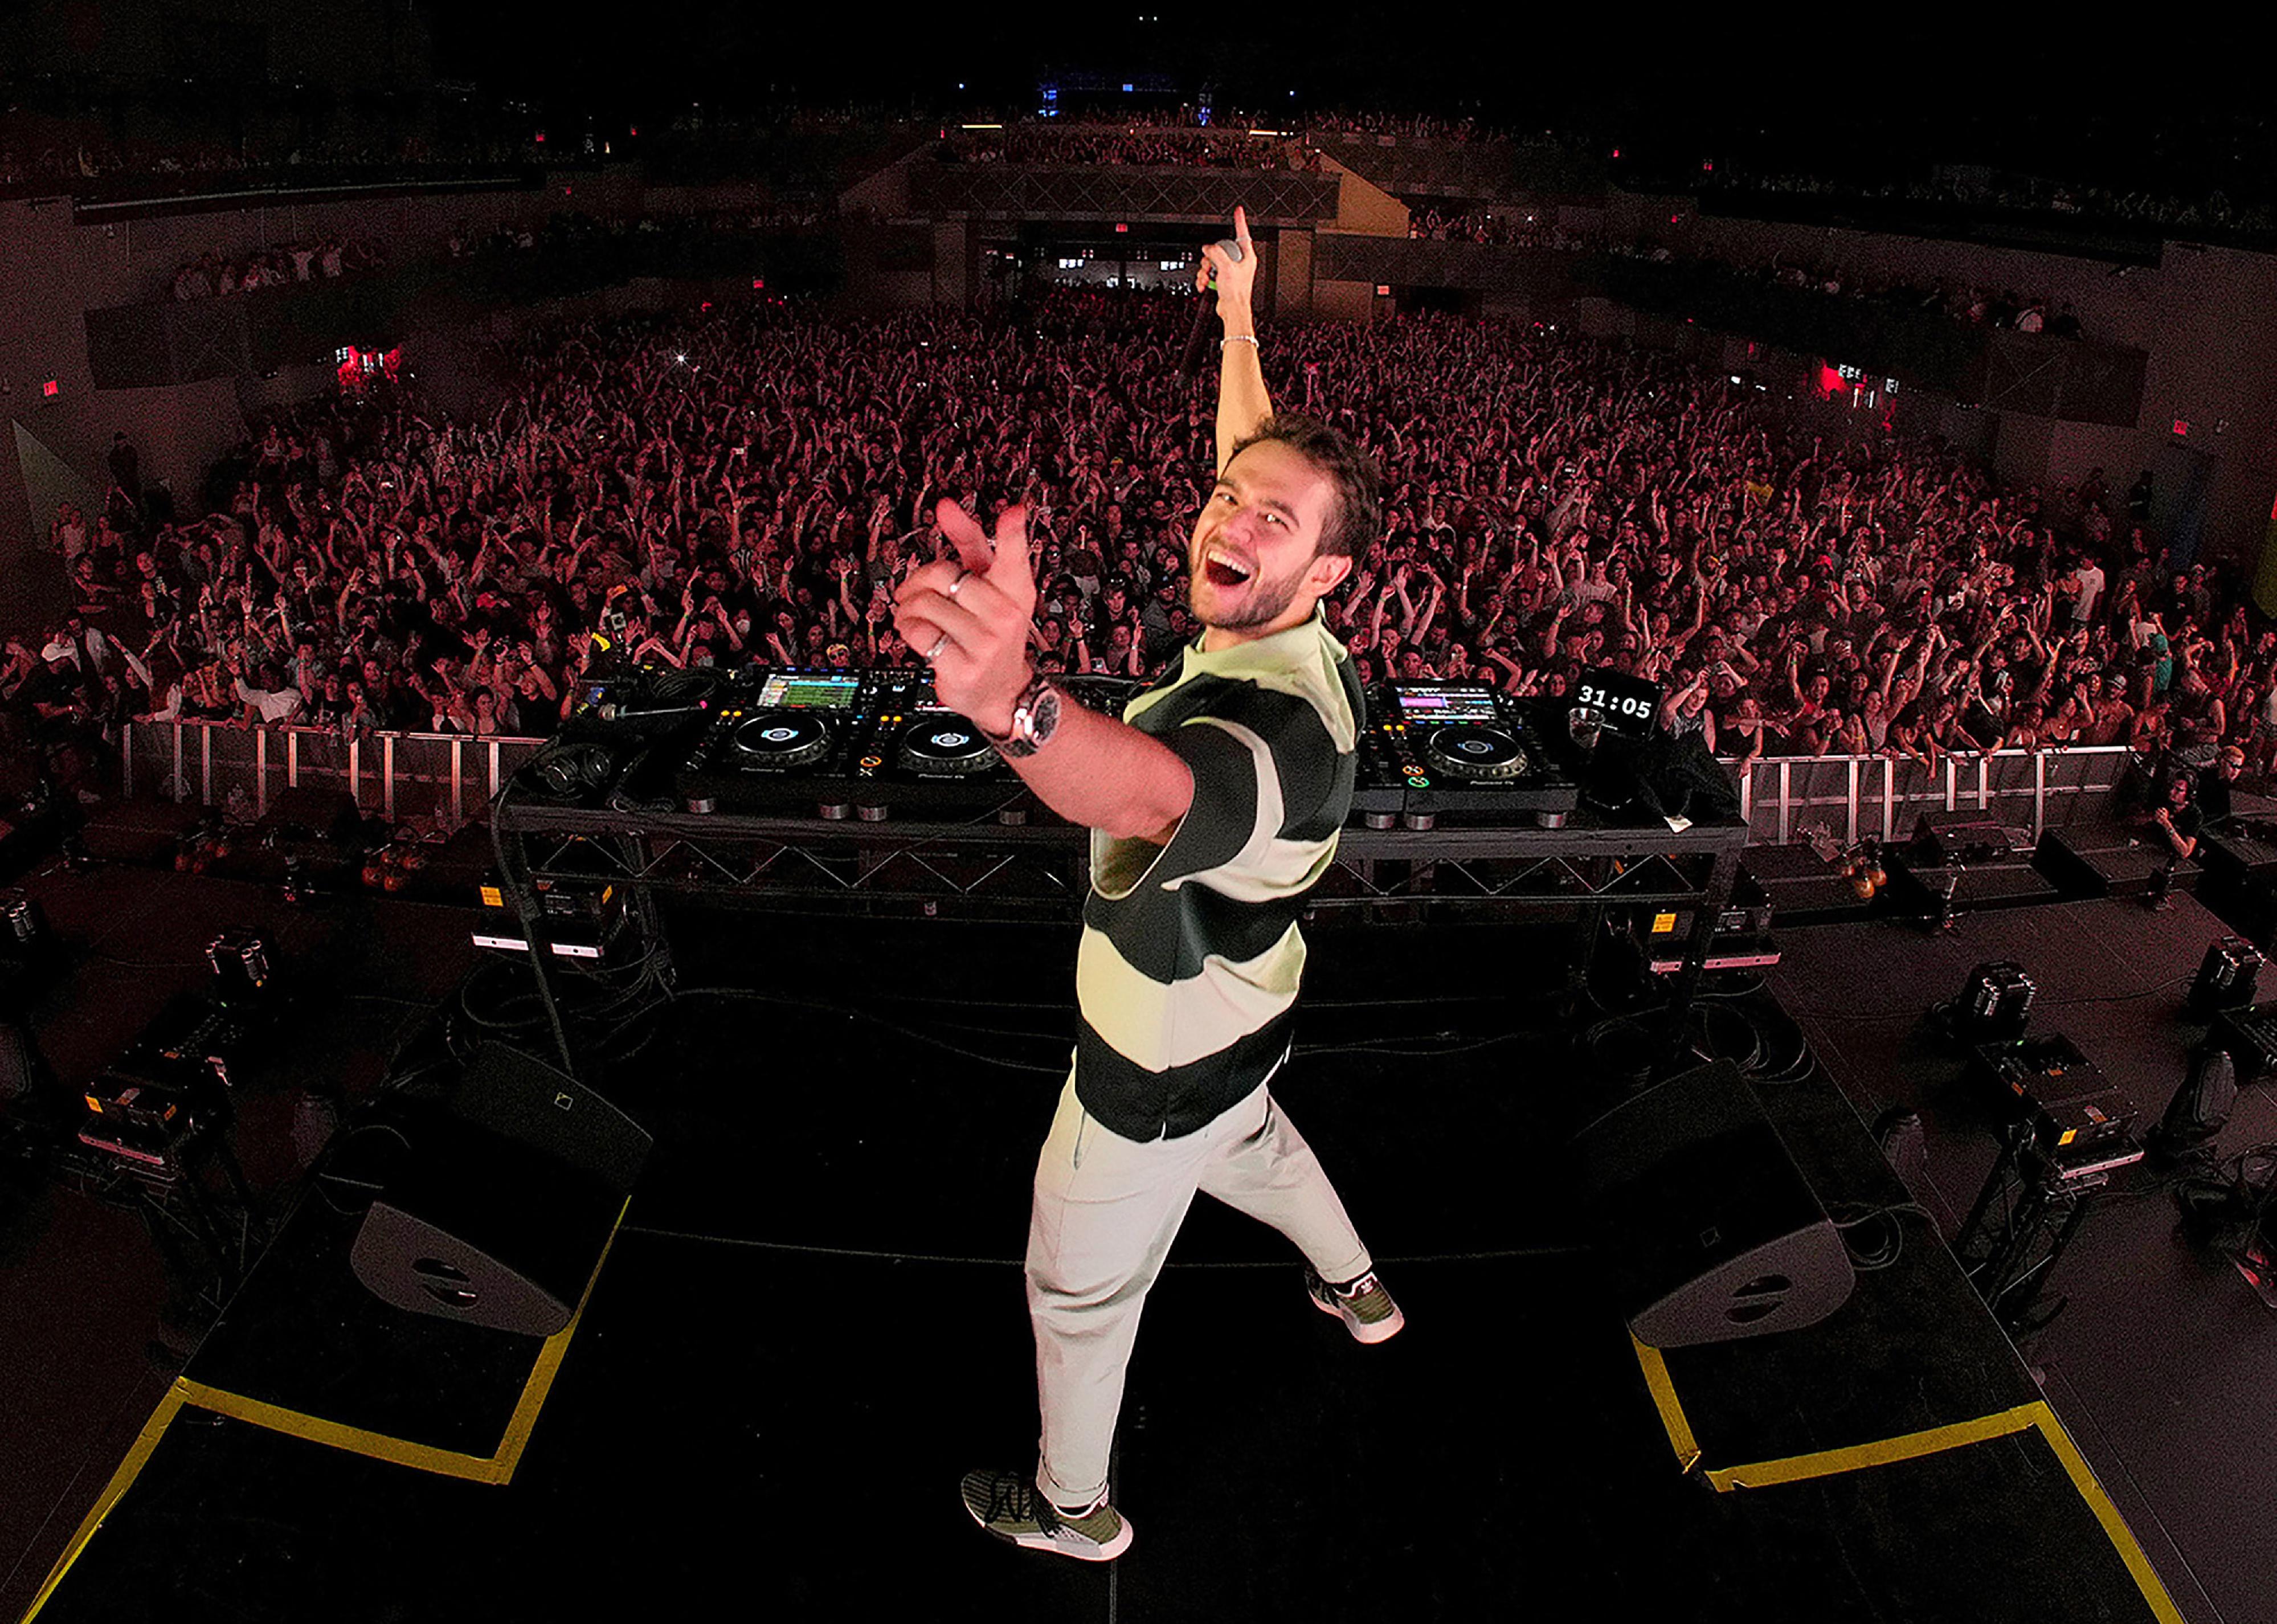 Zedd performing onstage in a black-and-white striped shirt.